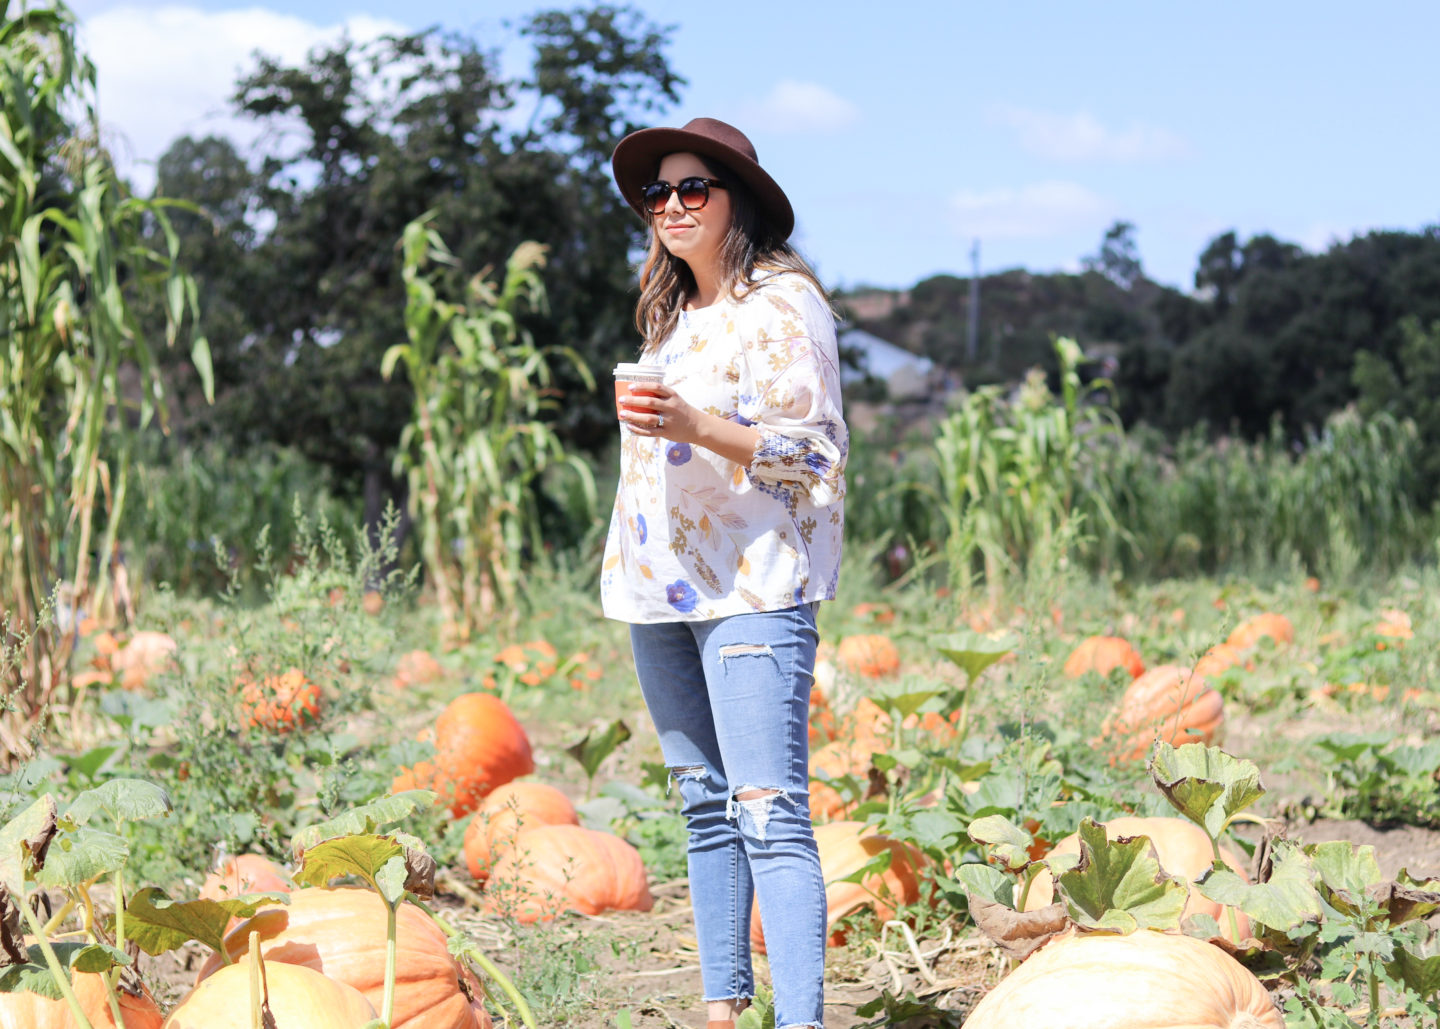 San Diego Fashion Blogger at Pumpkin Patch, what to wear to the pumpkin patch